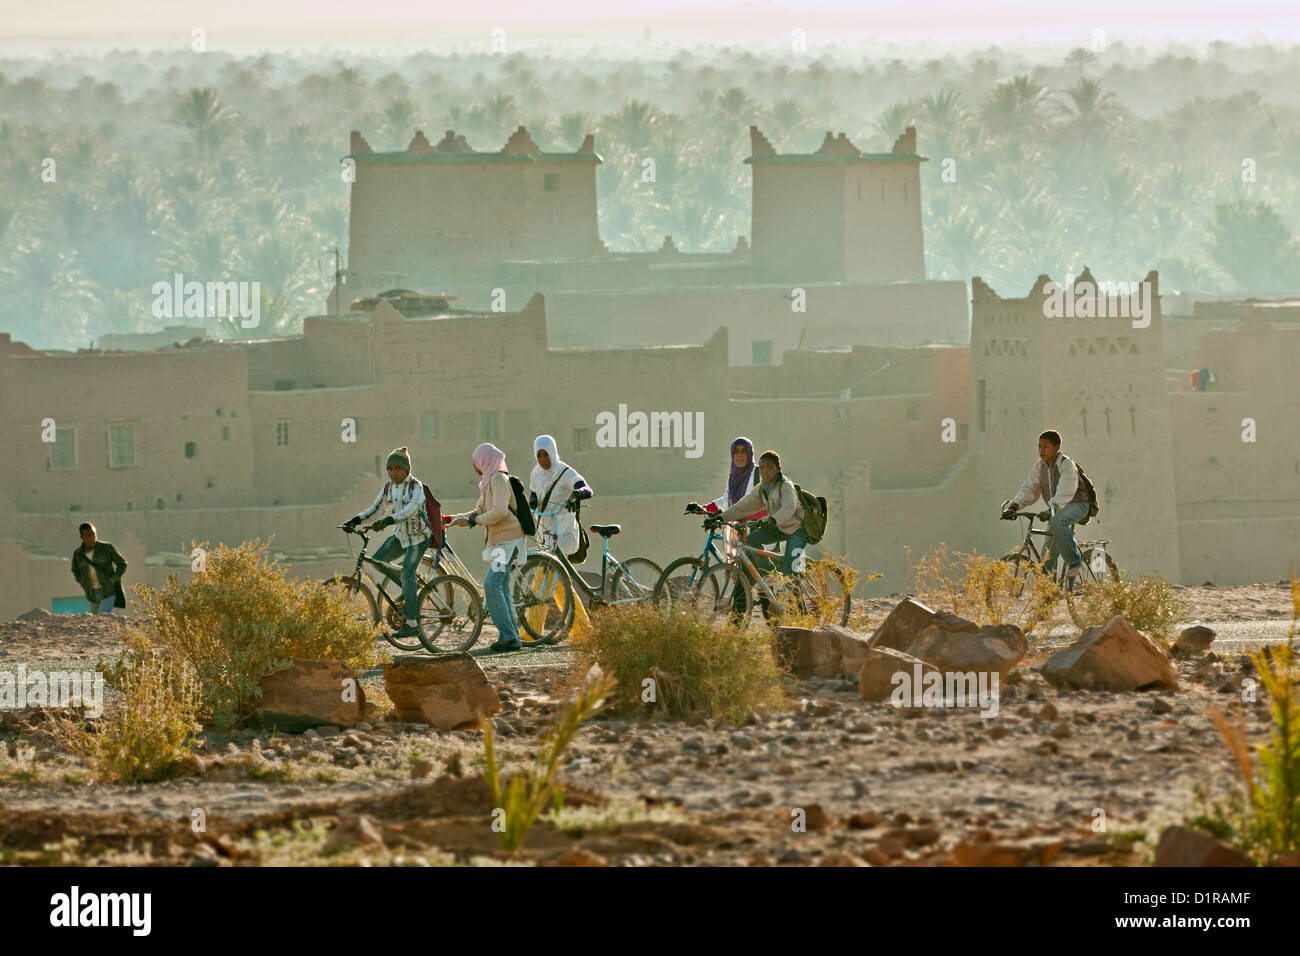 Morocco, near Zagora, kasbah Ziwane. Sunrise over oasis and palm trees. kasbah and ksar. Children going to school. Stock Photo